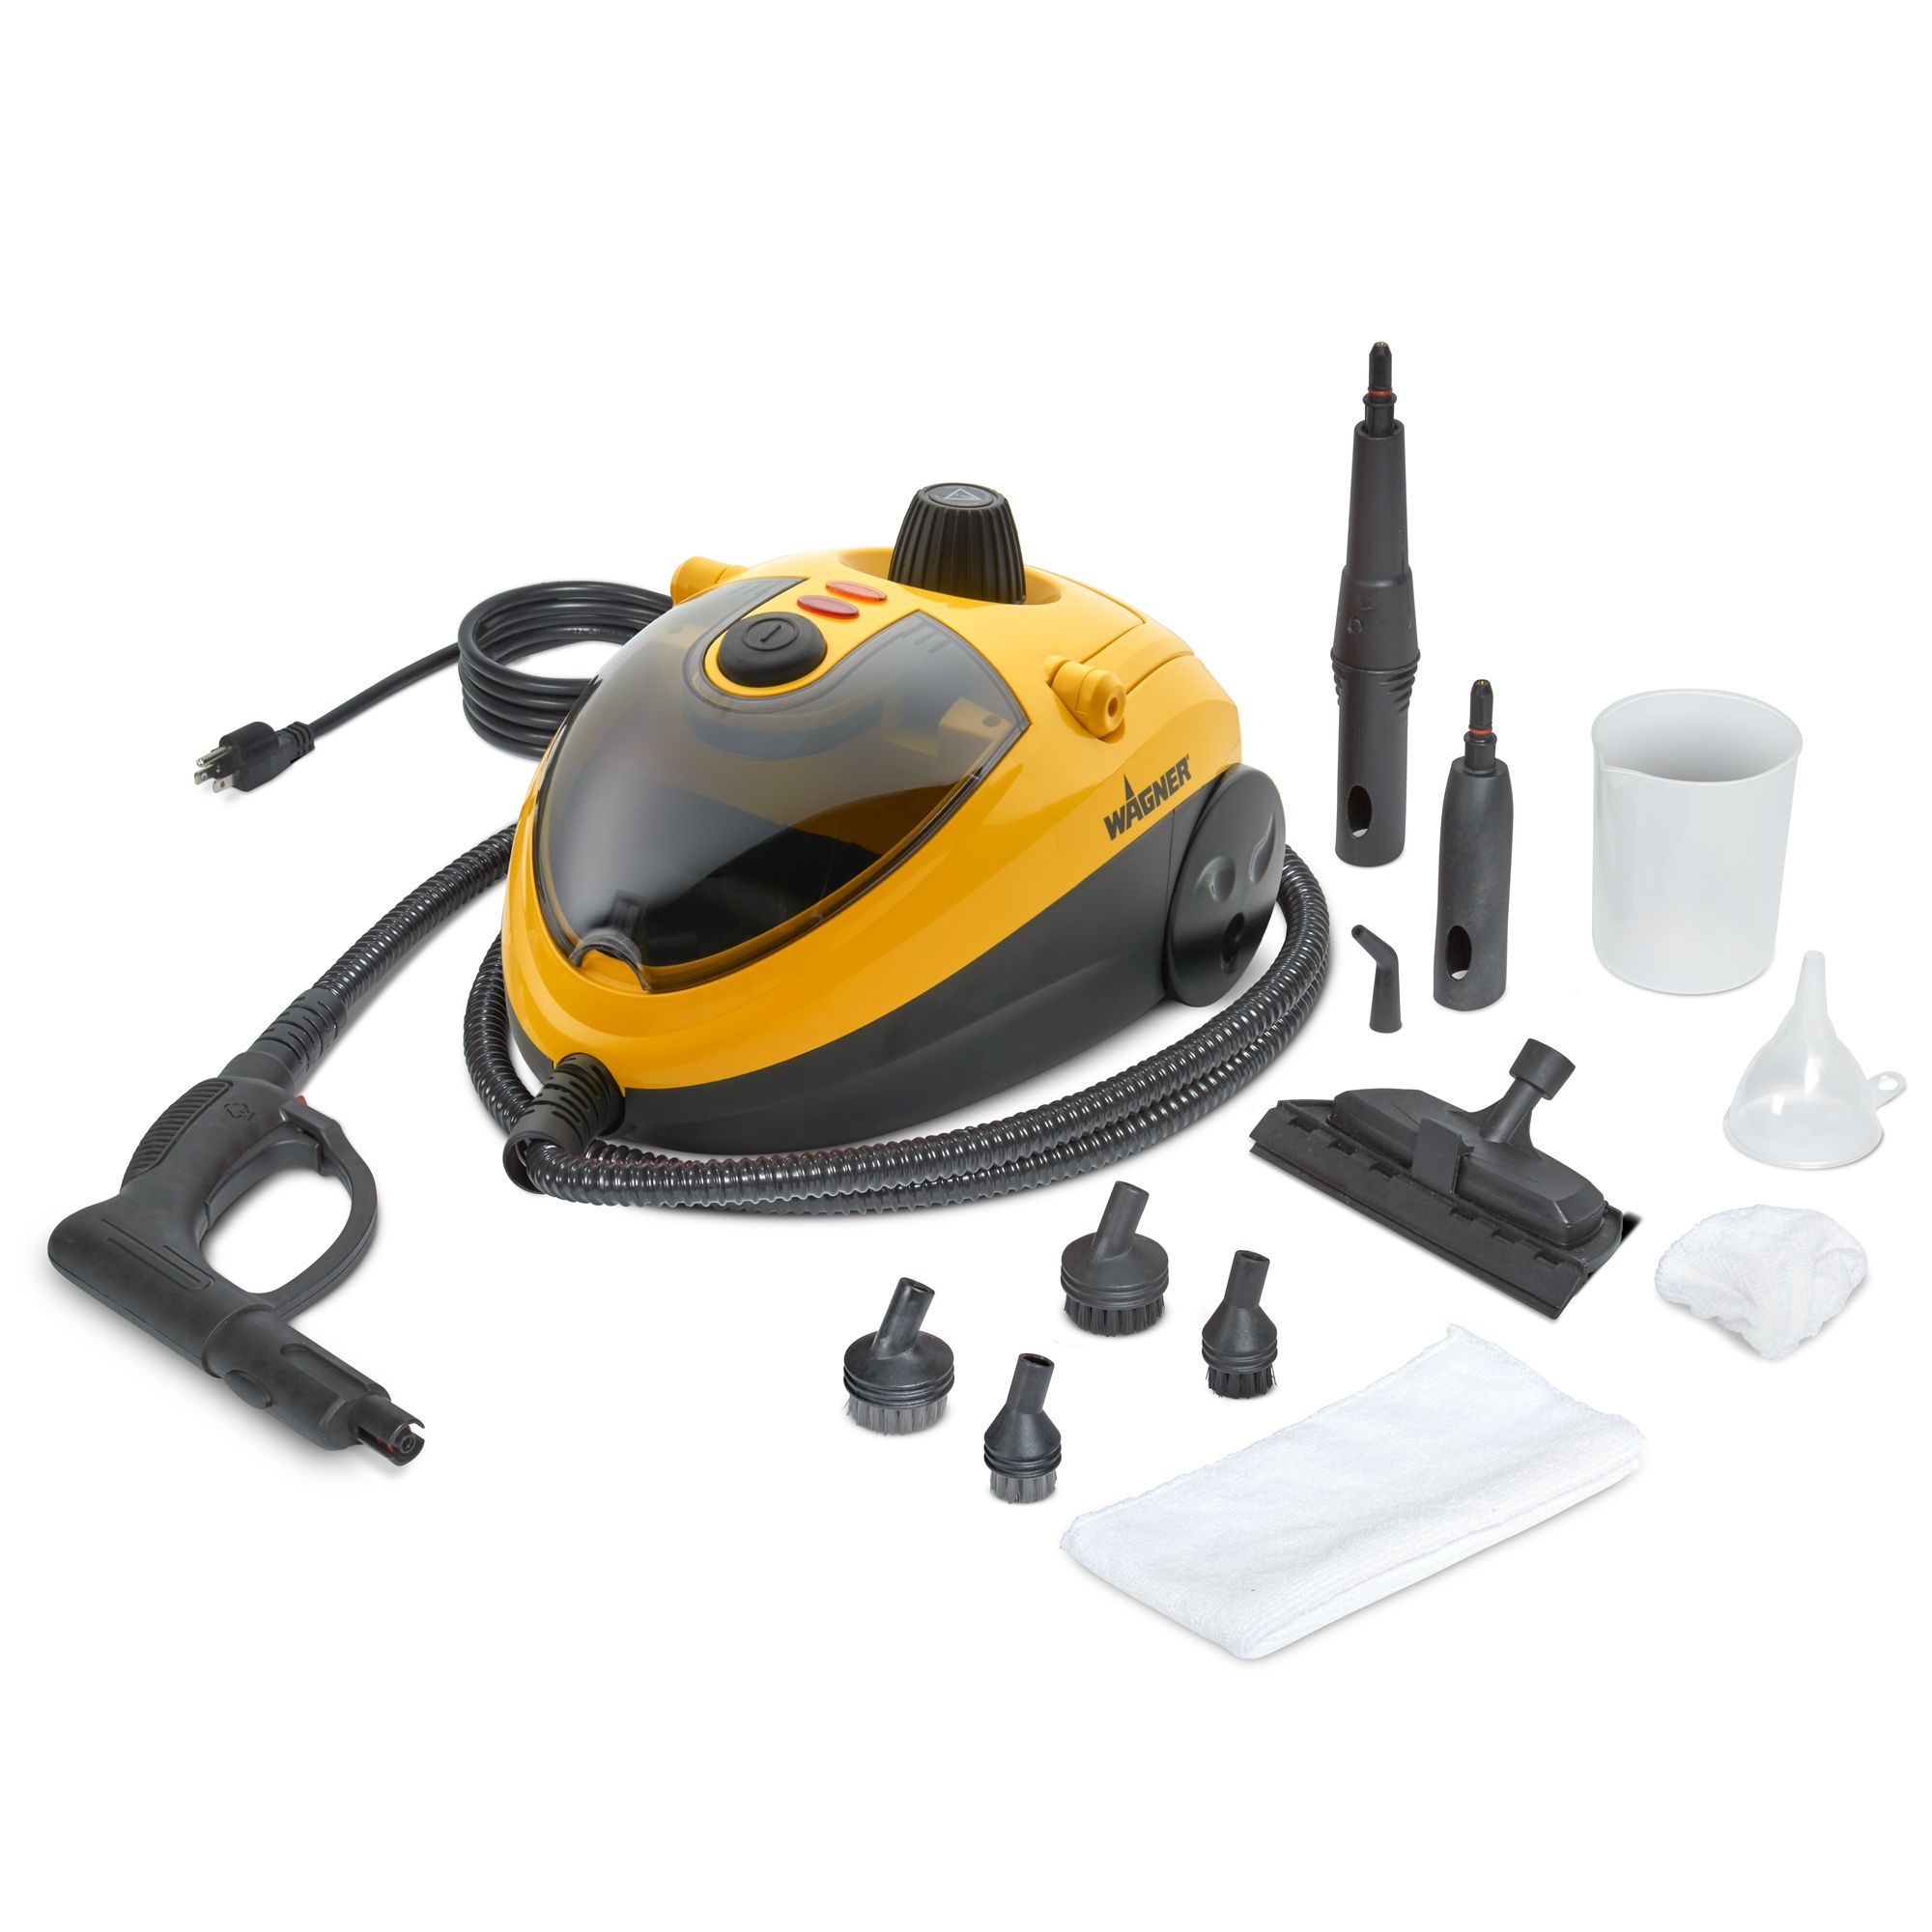 Black+decker Steam Cleaning Multipurpose System with 6 Attachments